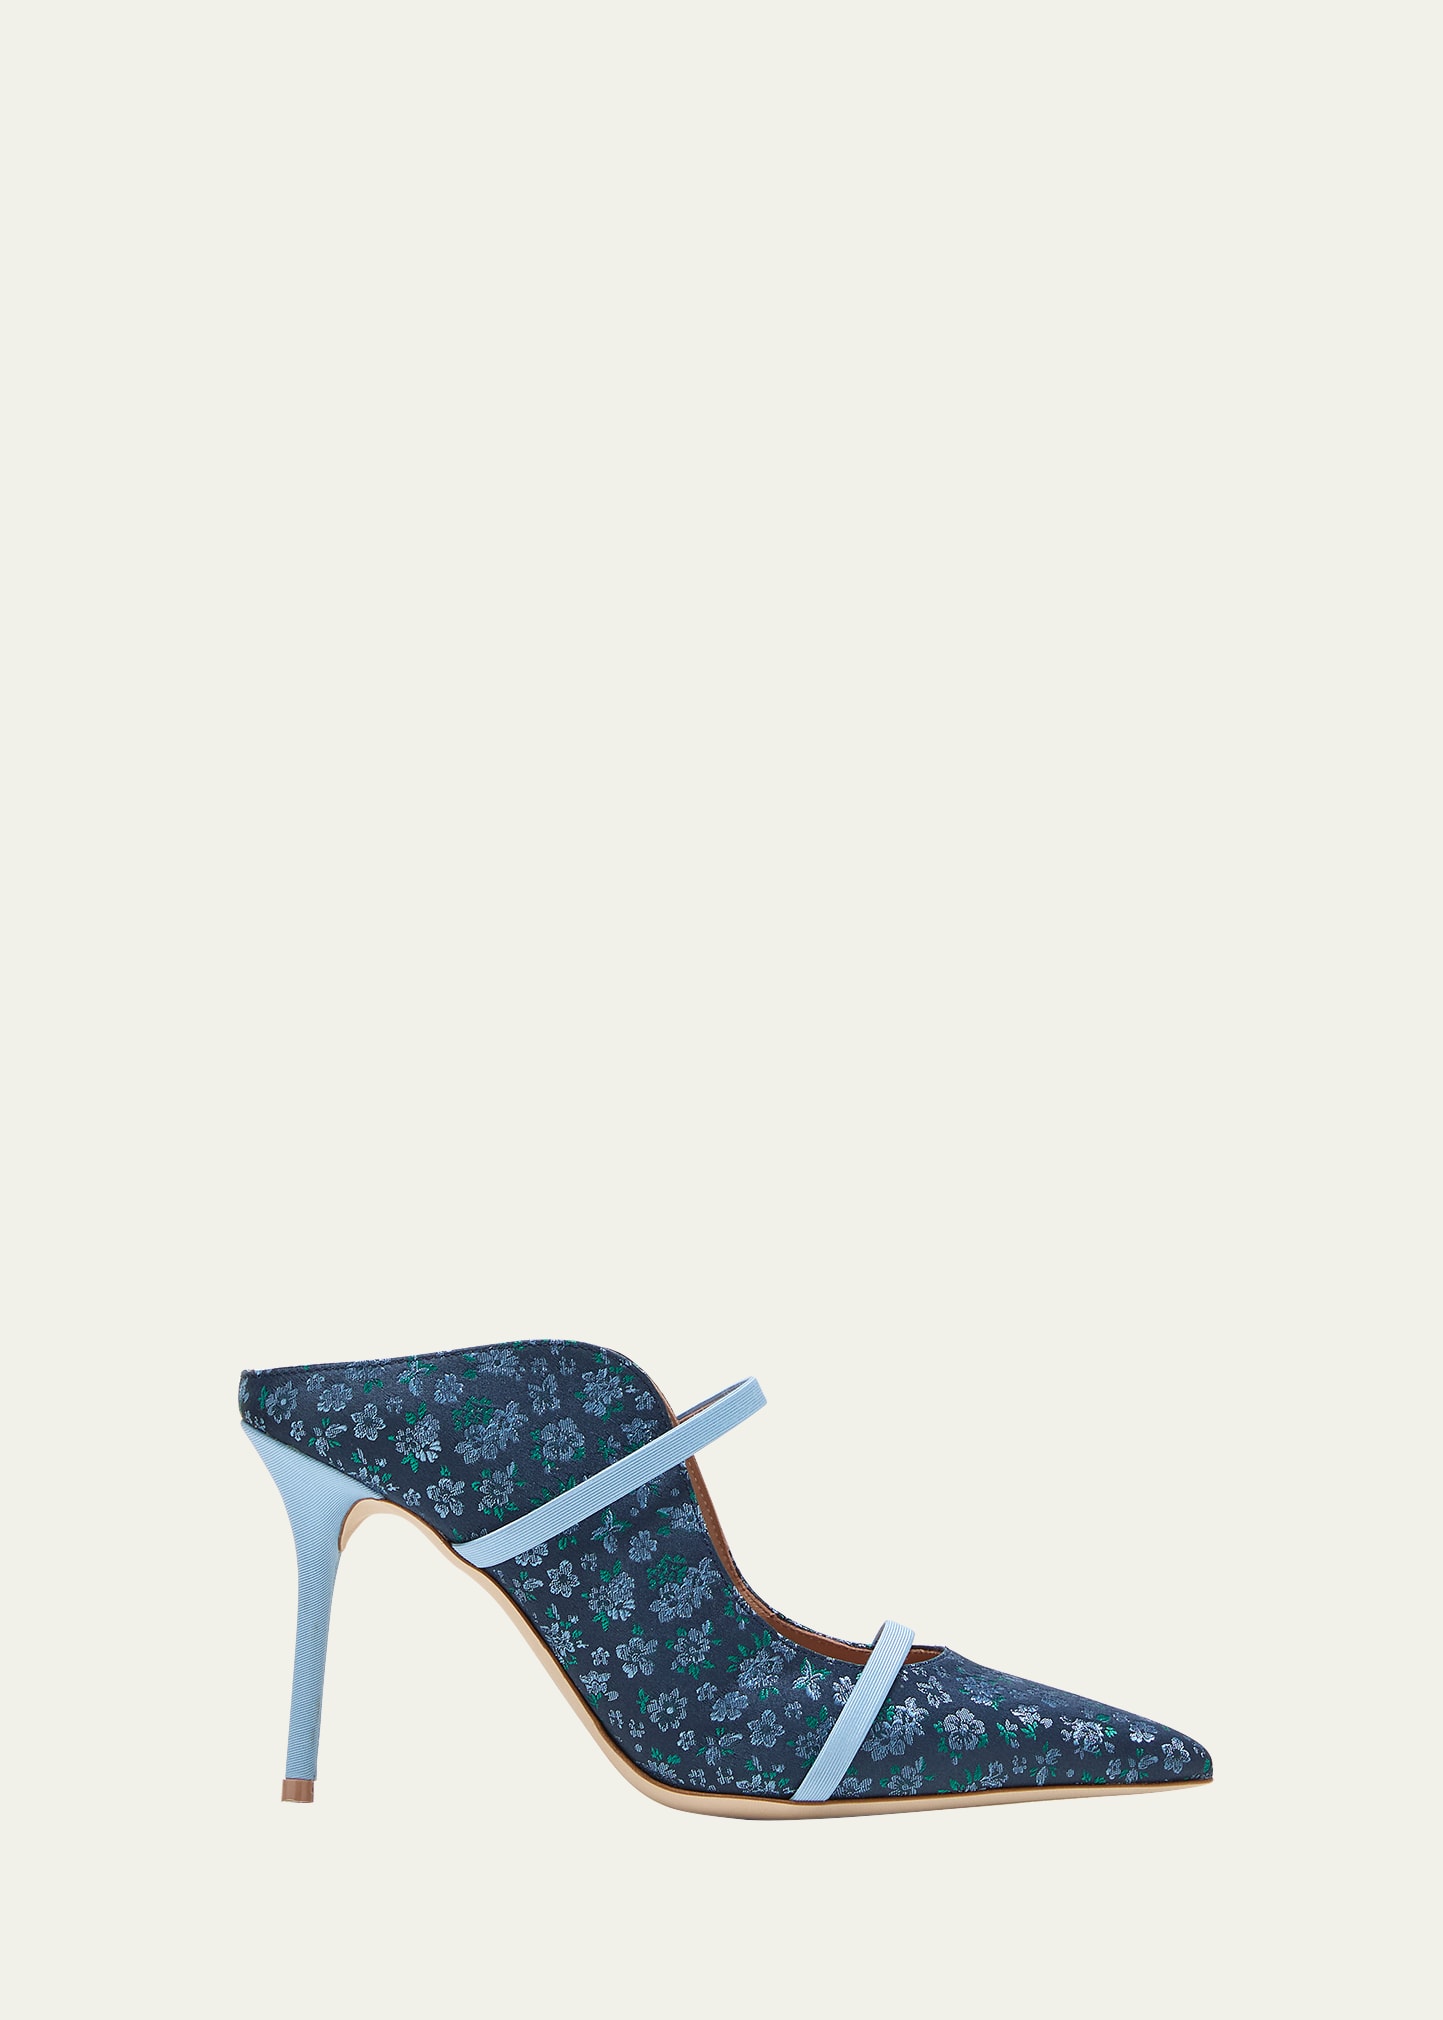 Malone Souliers Maureen Floral Jacquard Mule Pumps In Navy Floral Baby